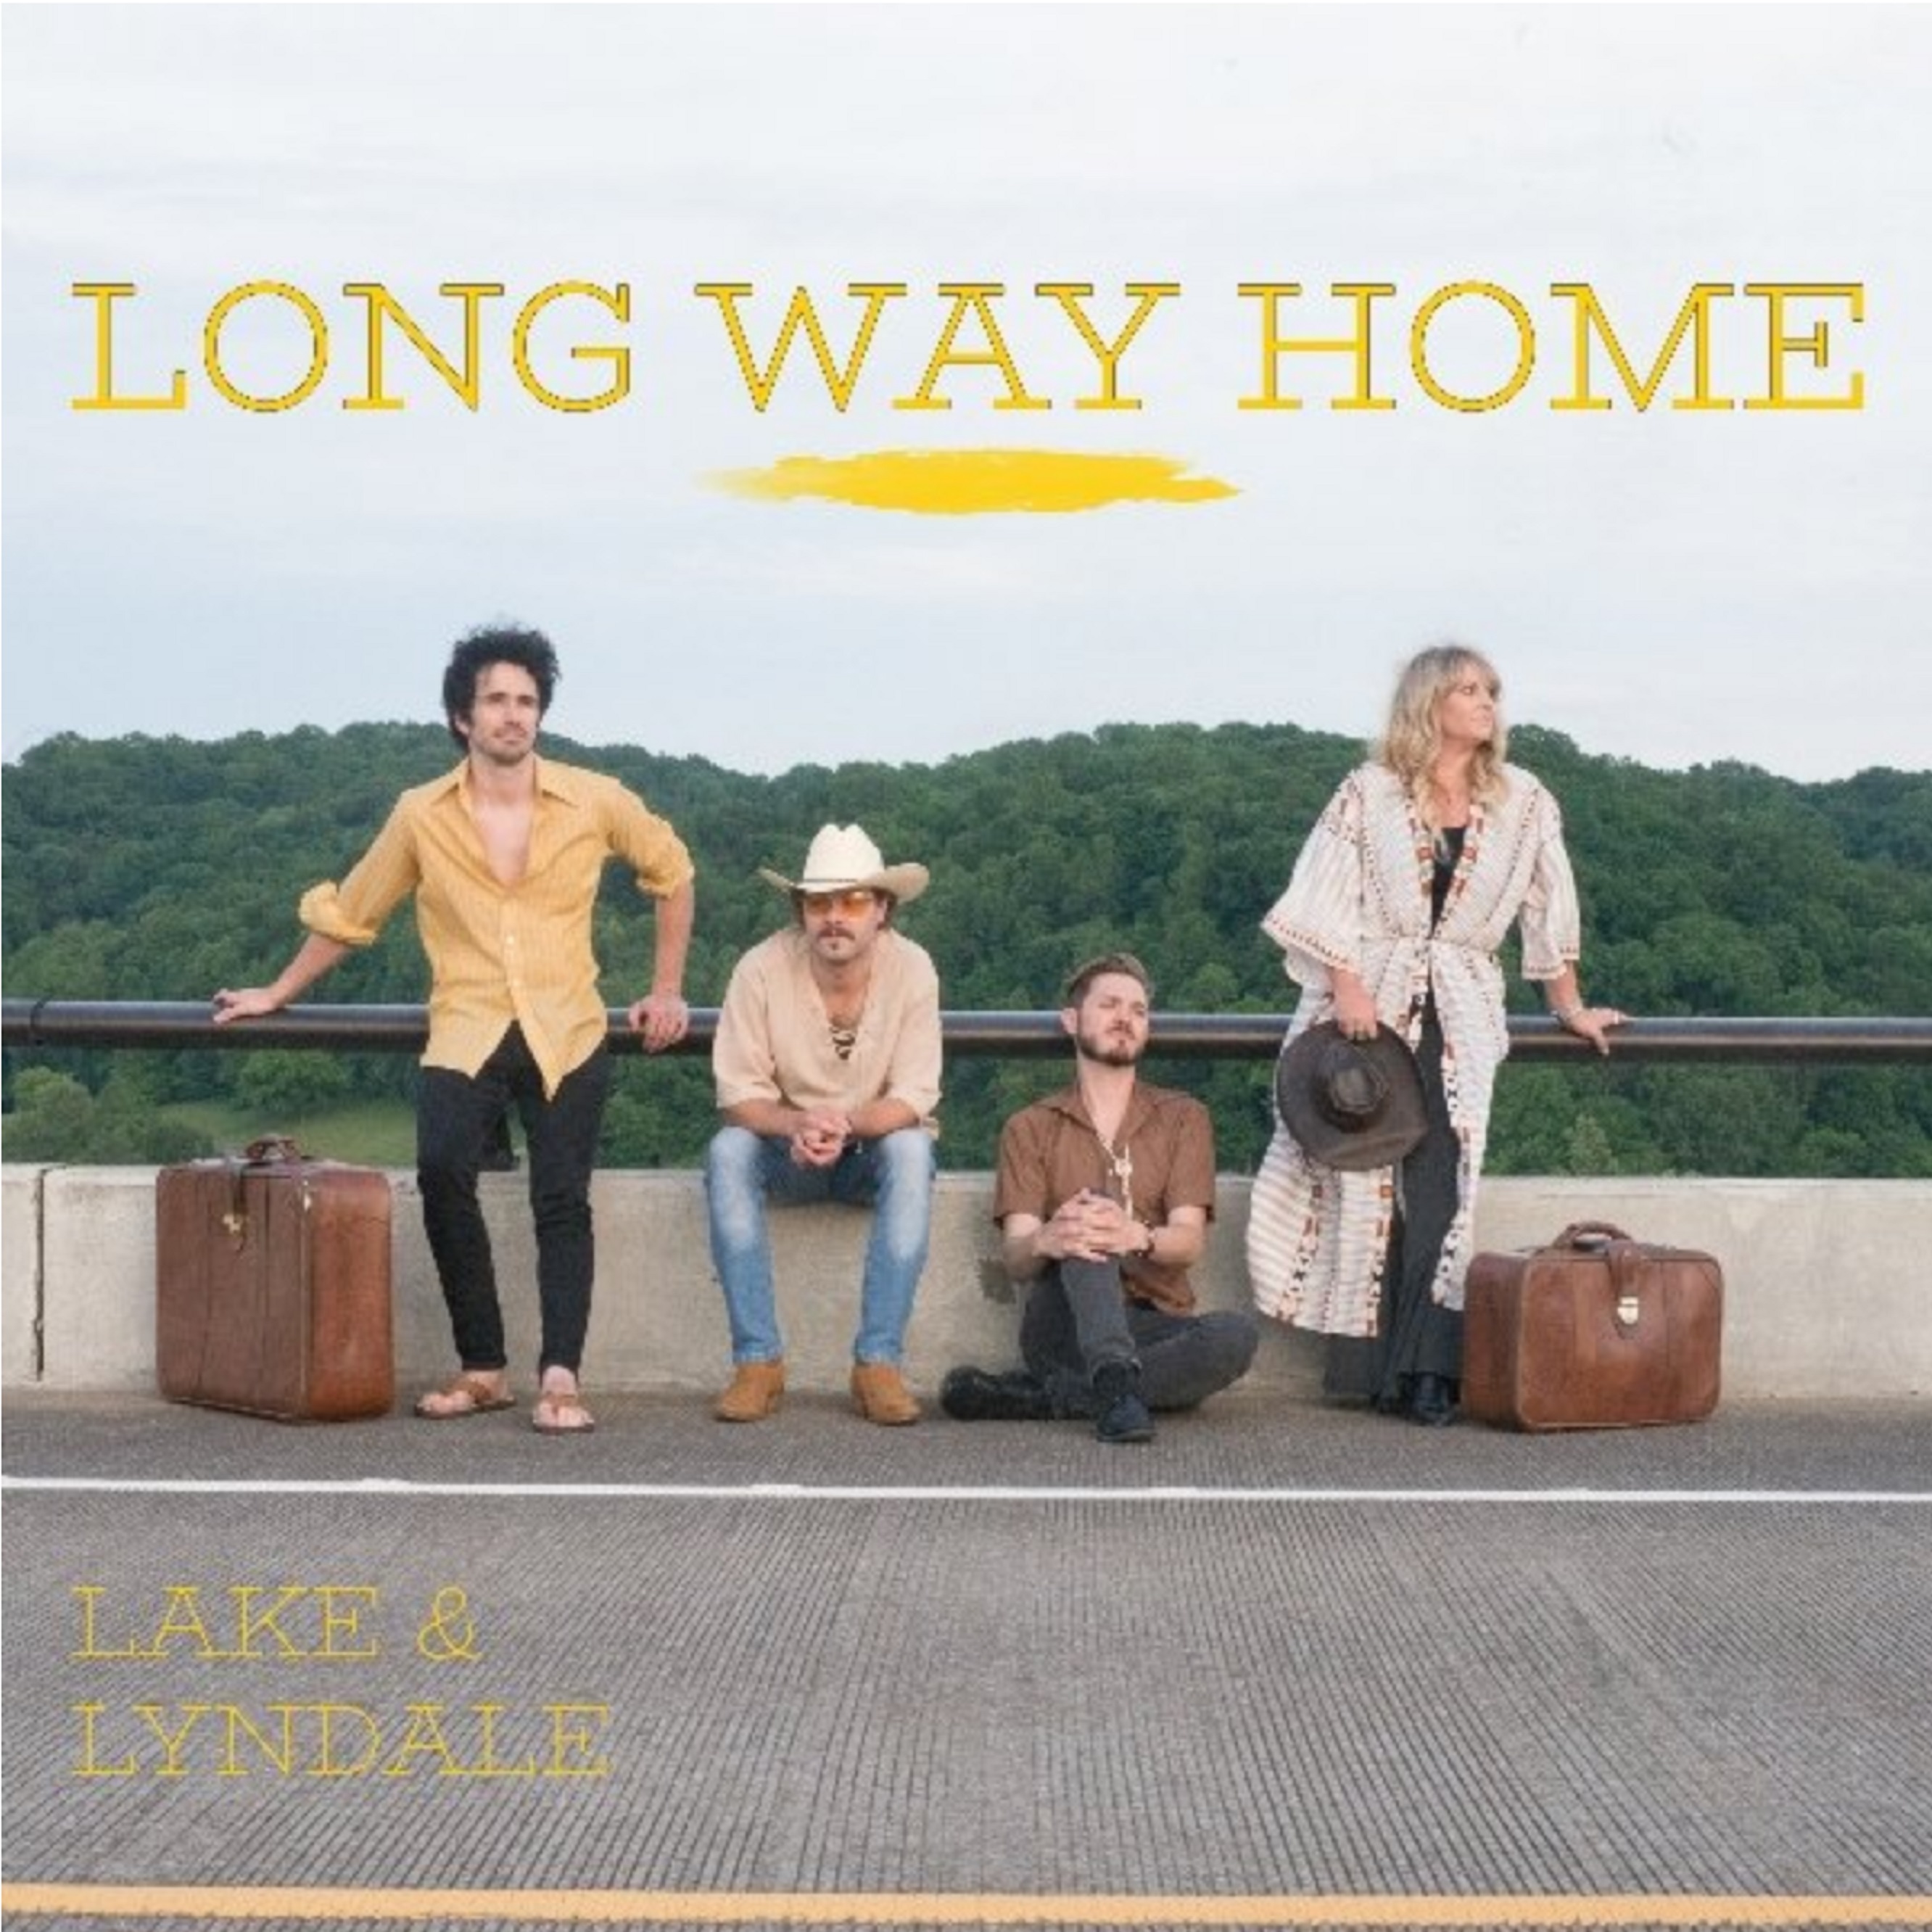 Americana Group Lake & Lyndale Spark Their Gypsy Soul with “Long Way Home”